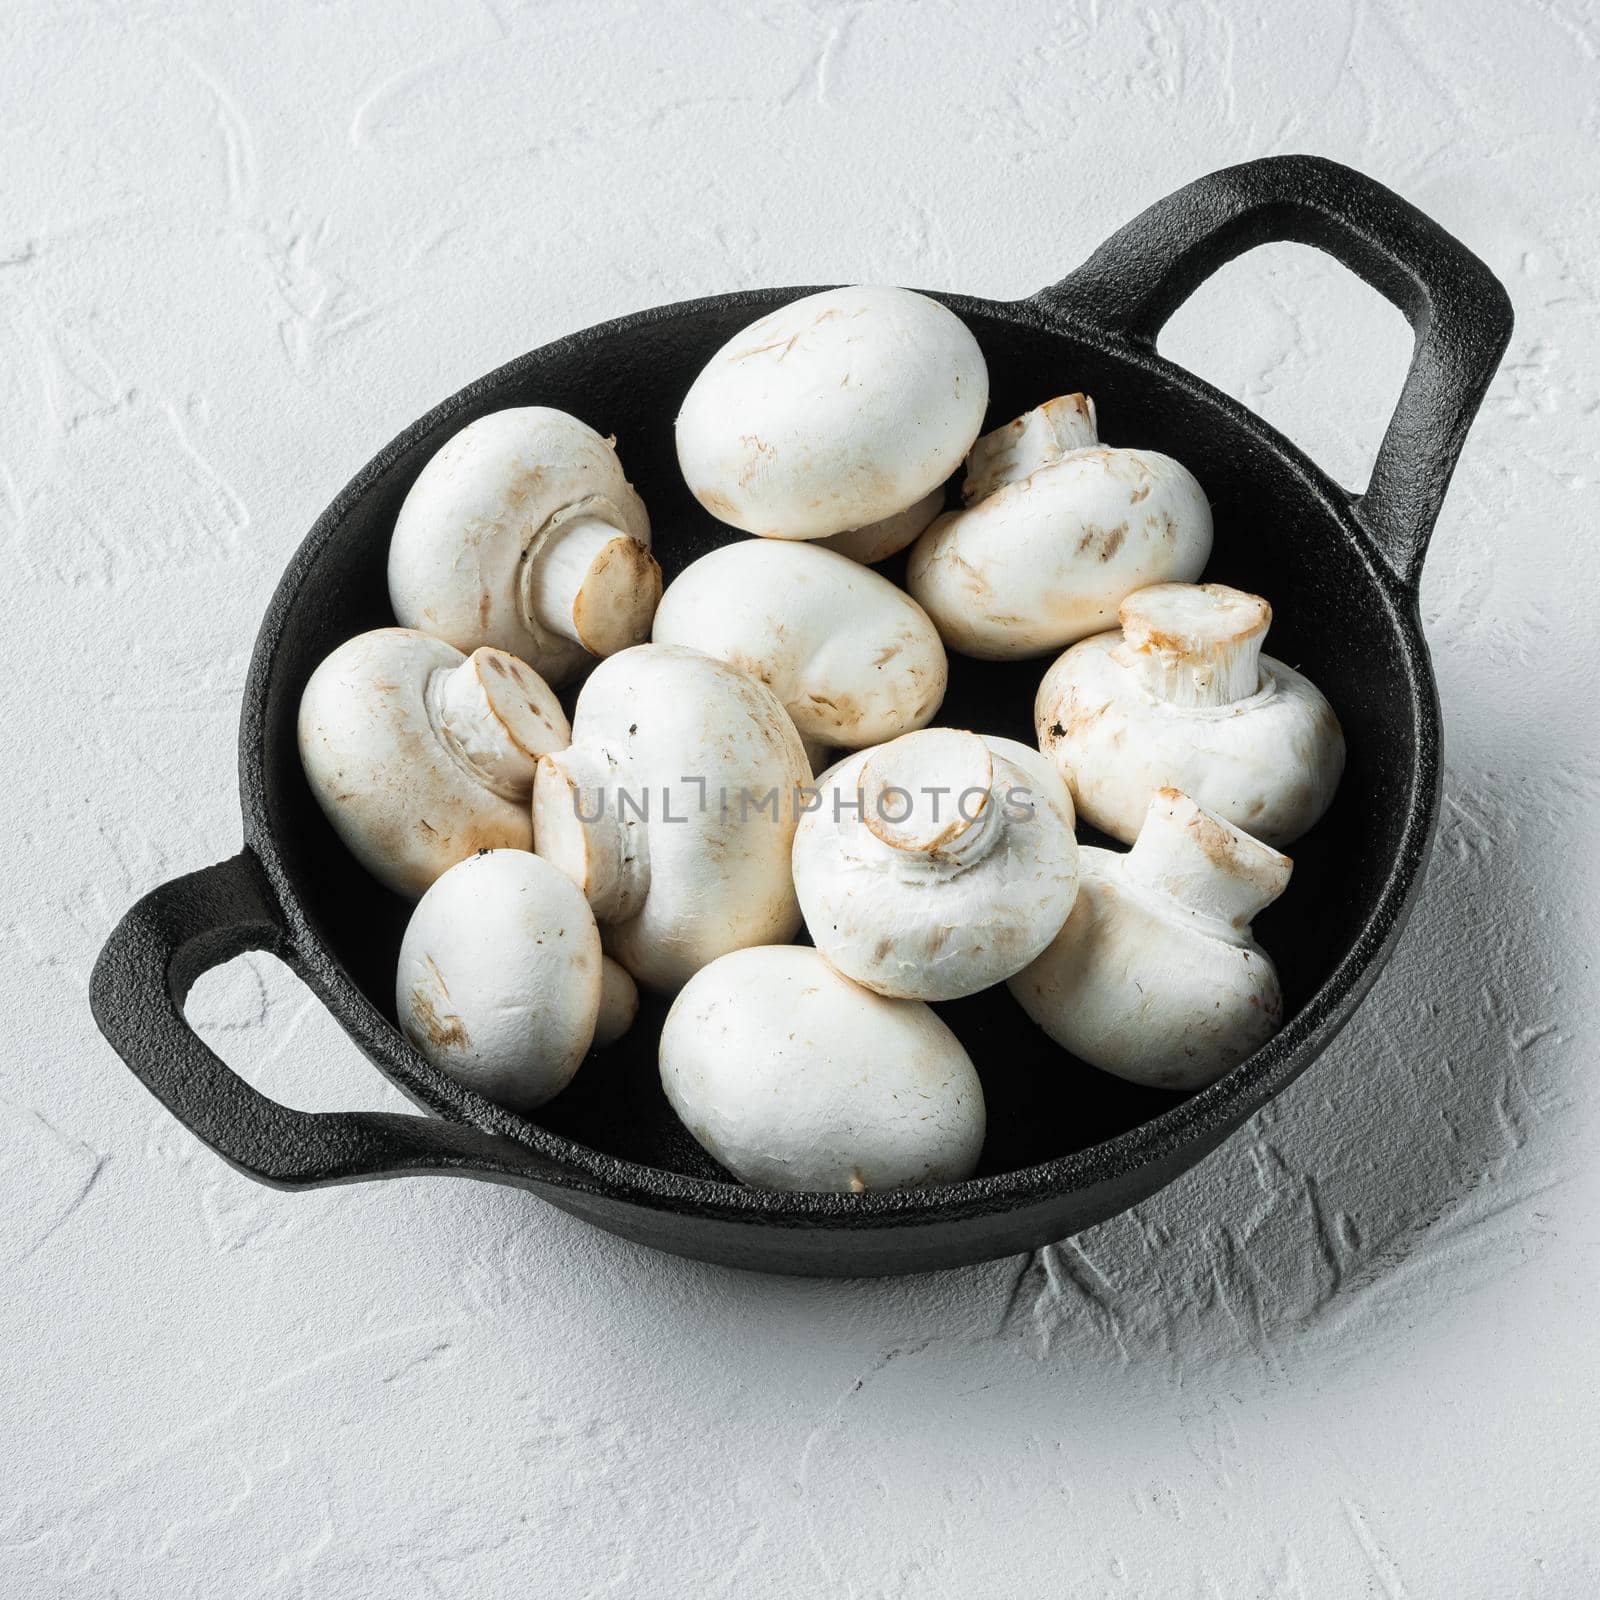 Mushroom champignon, in cast iron frying pan, on white stone surface, square format by Ilianesolenyi